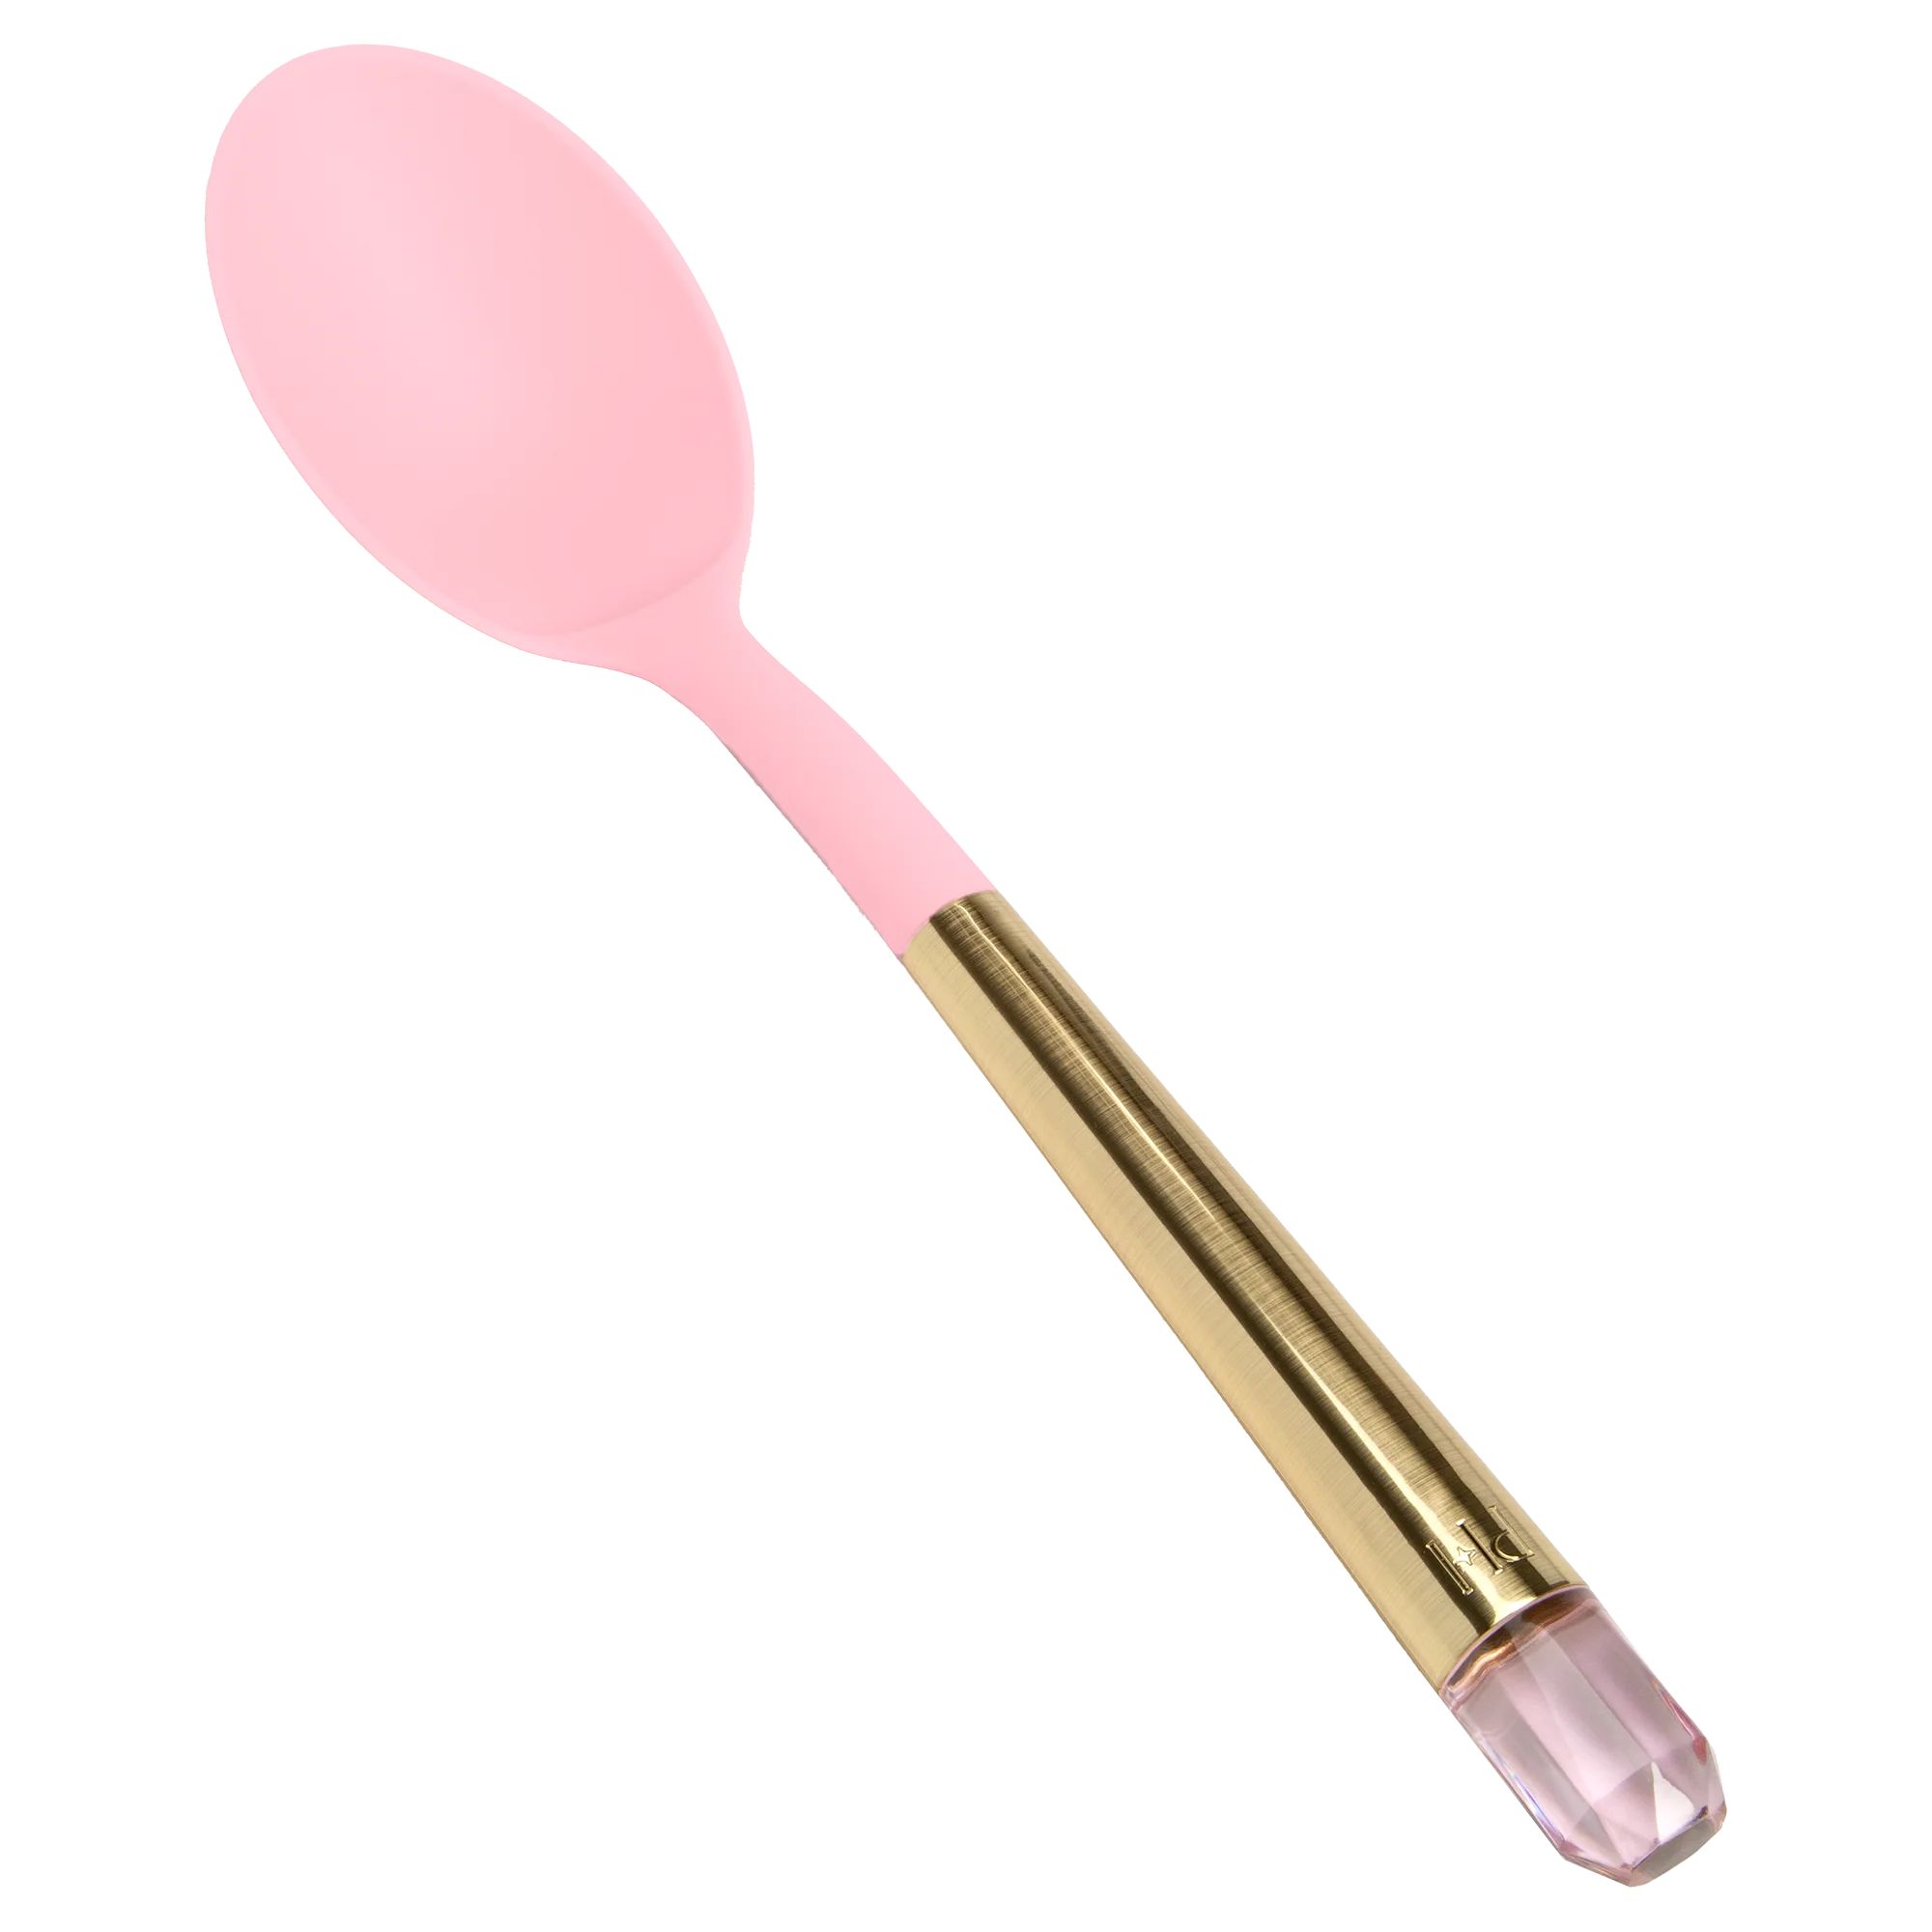 Paris Hilton Solid Spoon with Pink Jewel Shaped Handle, Pink | Walmart (US)